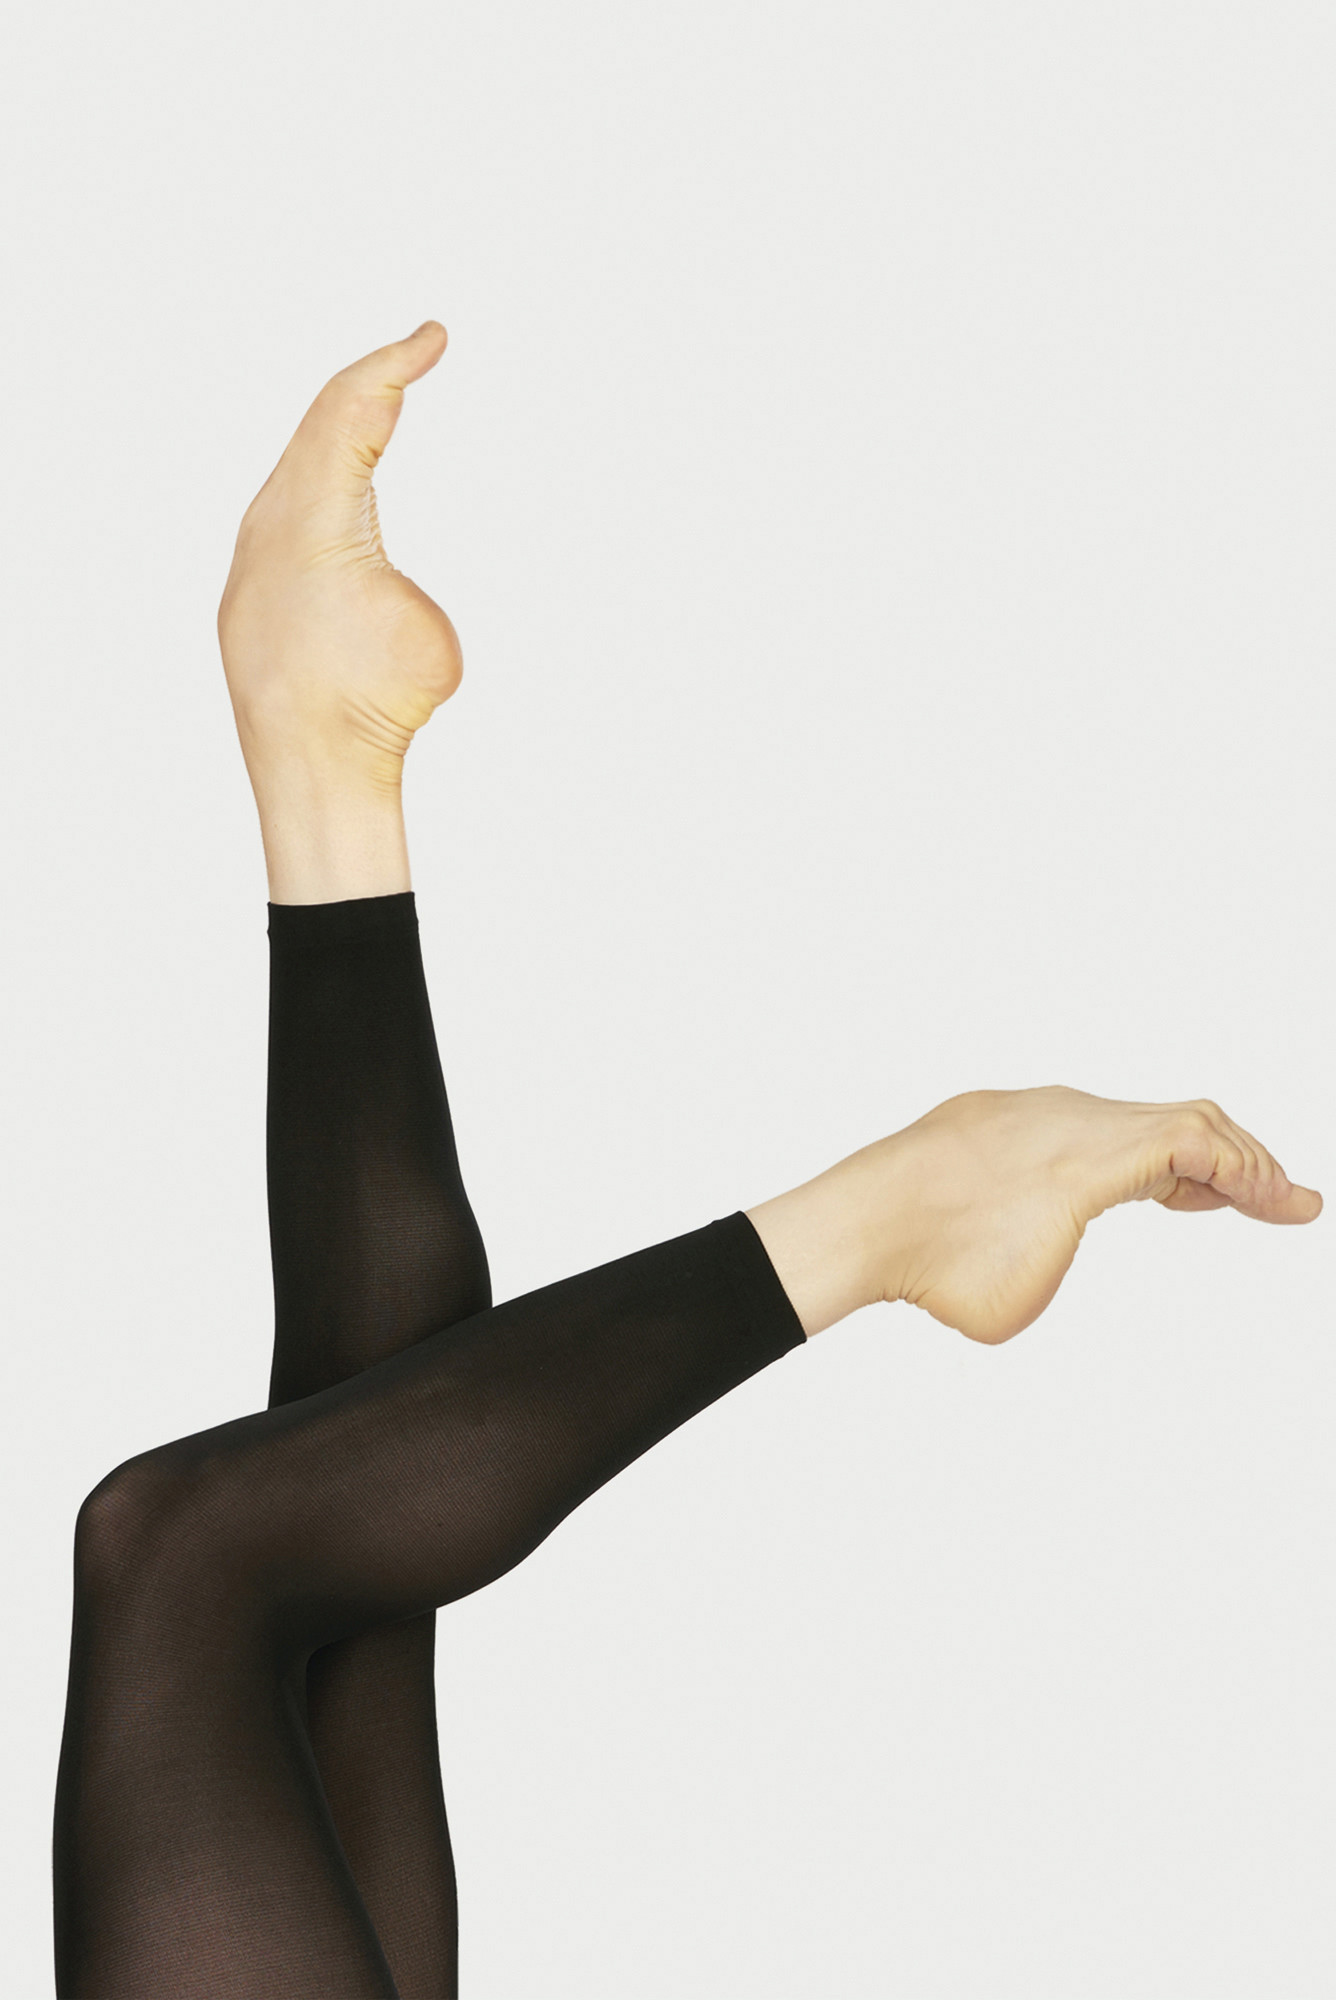 Black Footless Dance Tights for Girls & Women